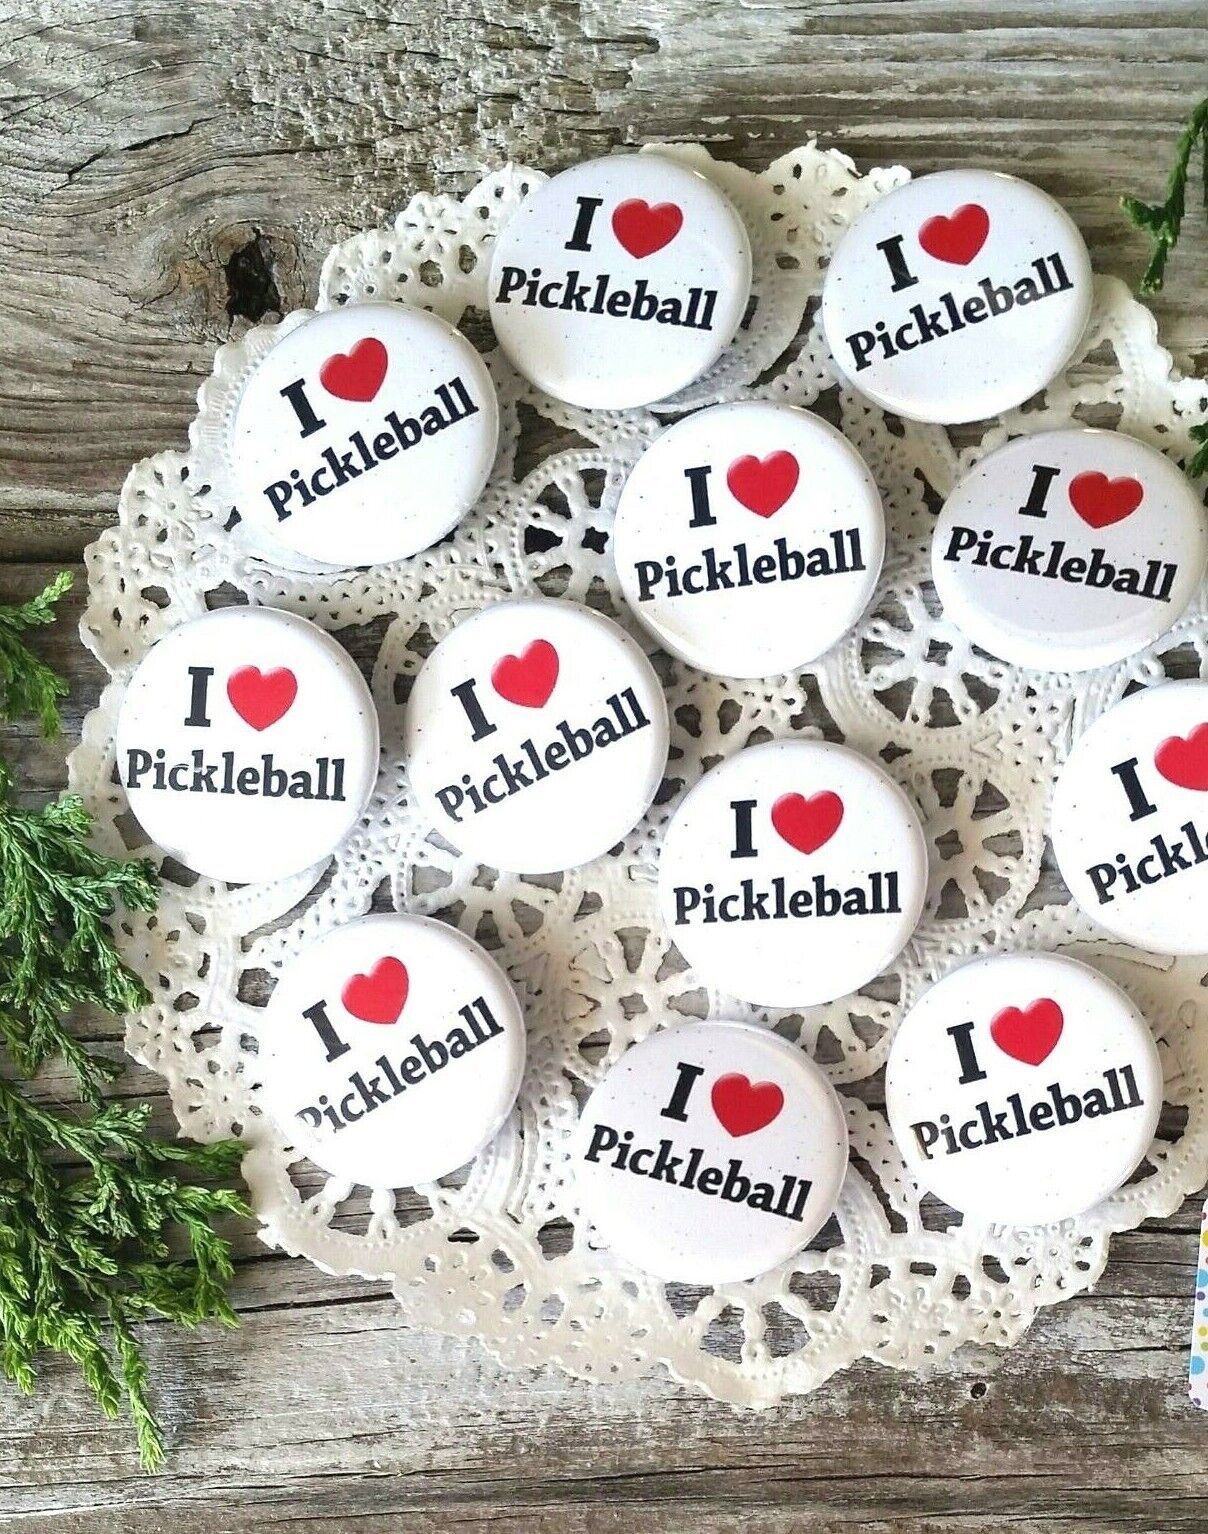 Pickle Ball Pins 1 1/4" PINBACK Buttons Party Favor USA Pickleball (10/set) Decorative Greetings Inc